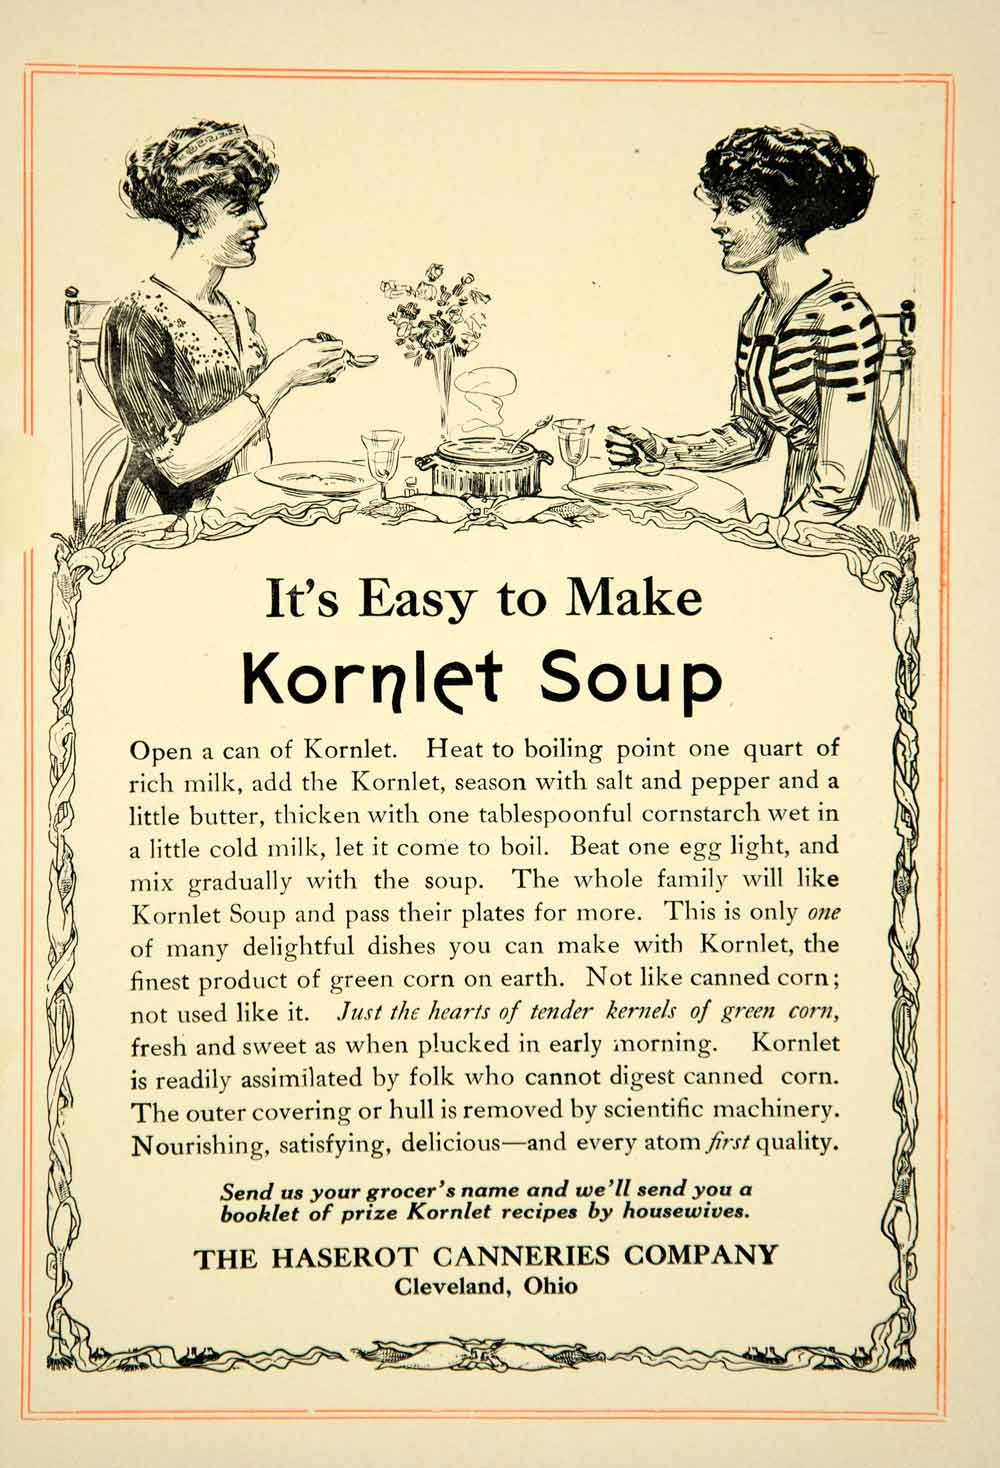 1911 Ad Haserot Canneries Kornlet Soup Food Kitchen Recipe Cooking YTT2